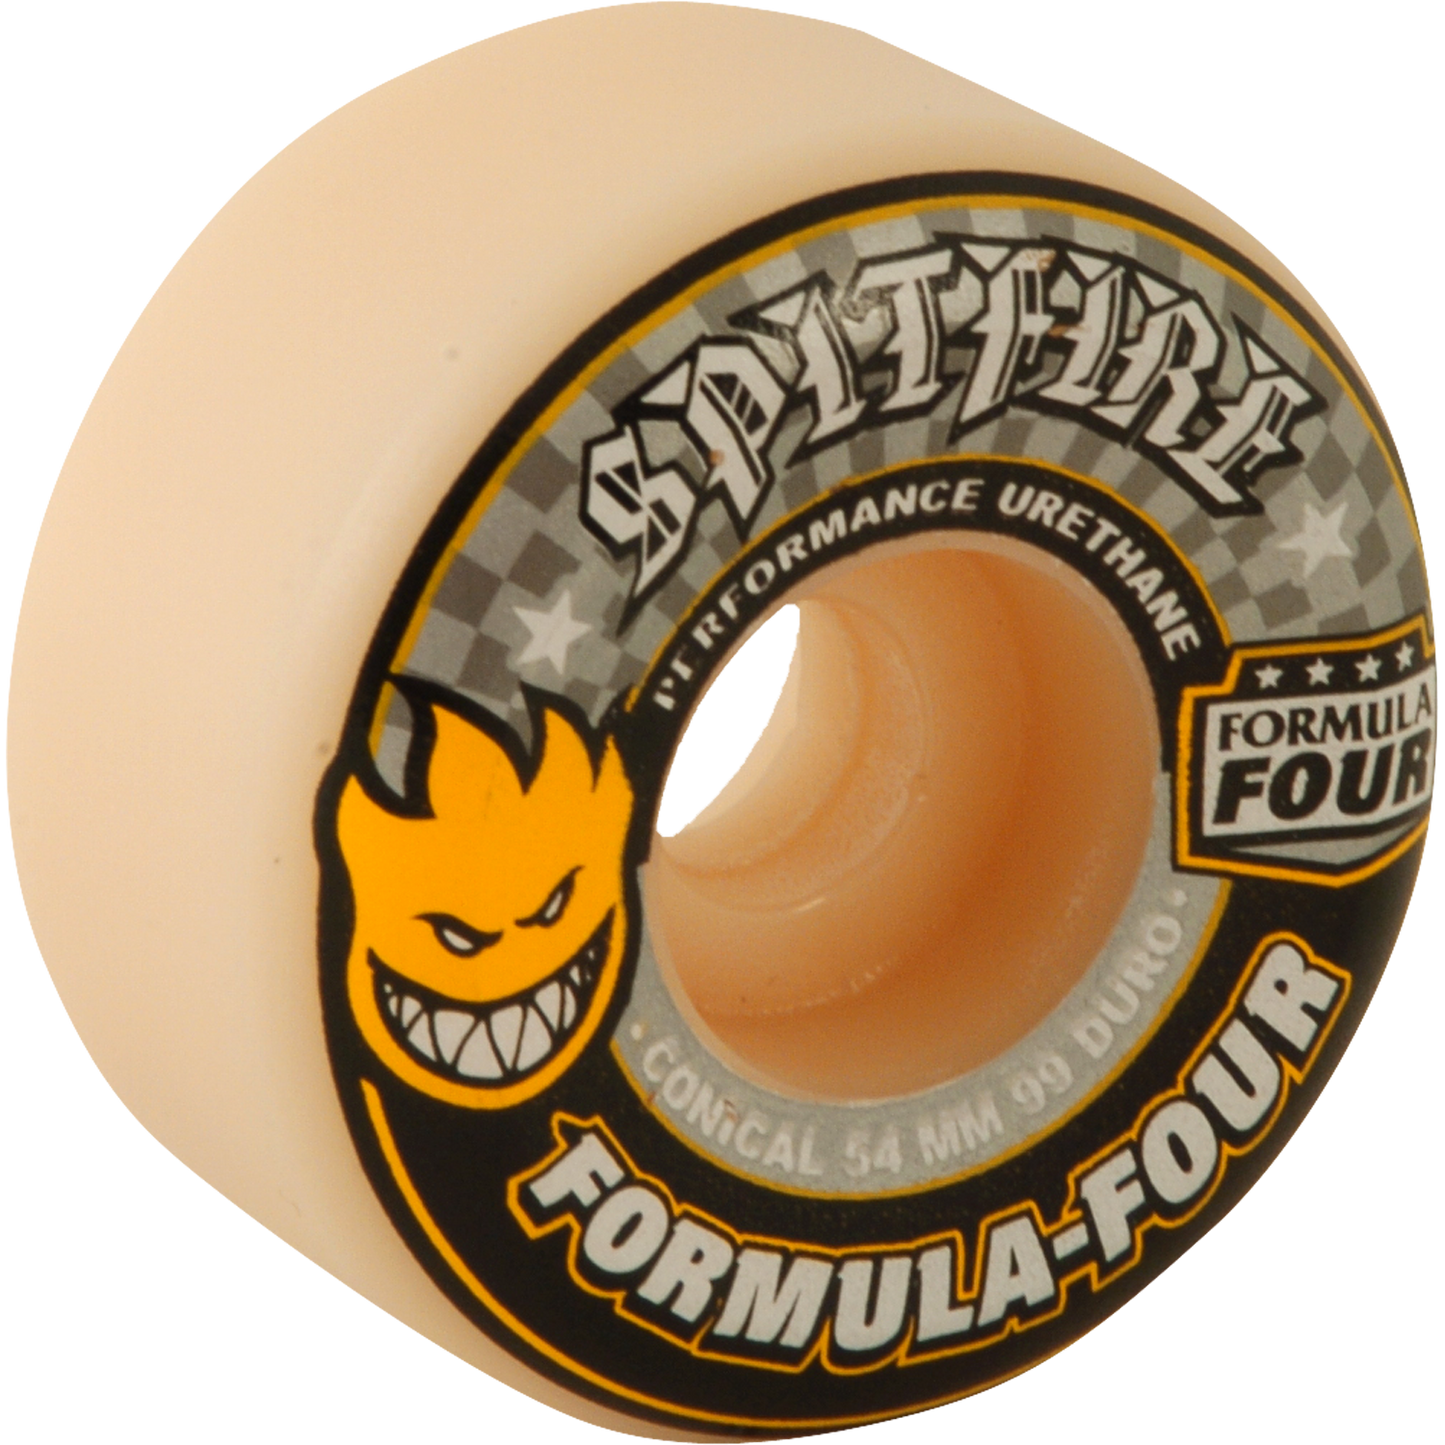 Spitfire F4 99a Conical 54mm White W/Yellow & Black Skateboard Wheels (Set of 4)